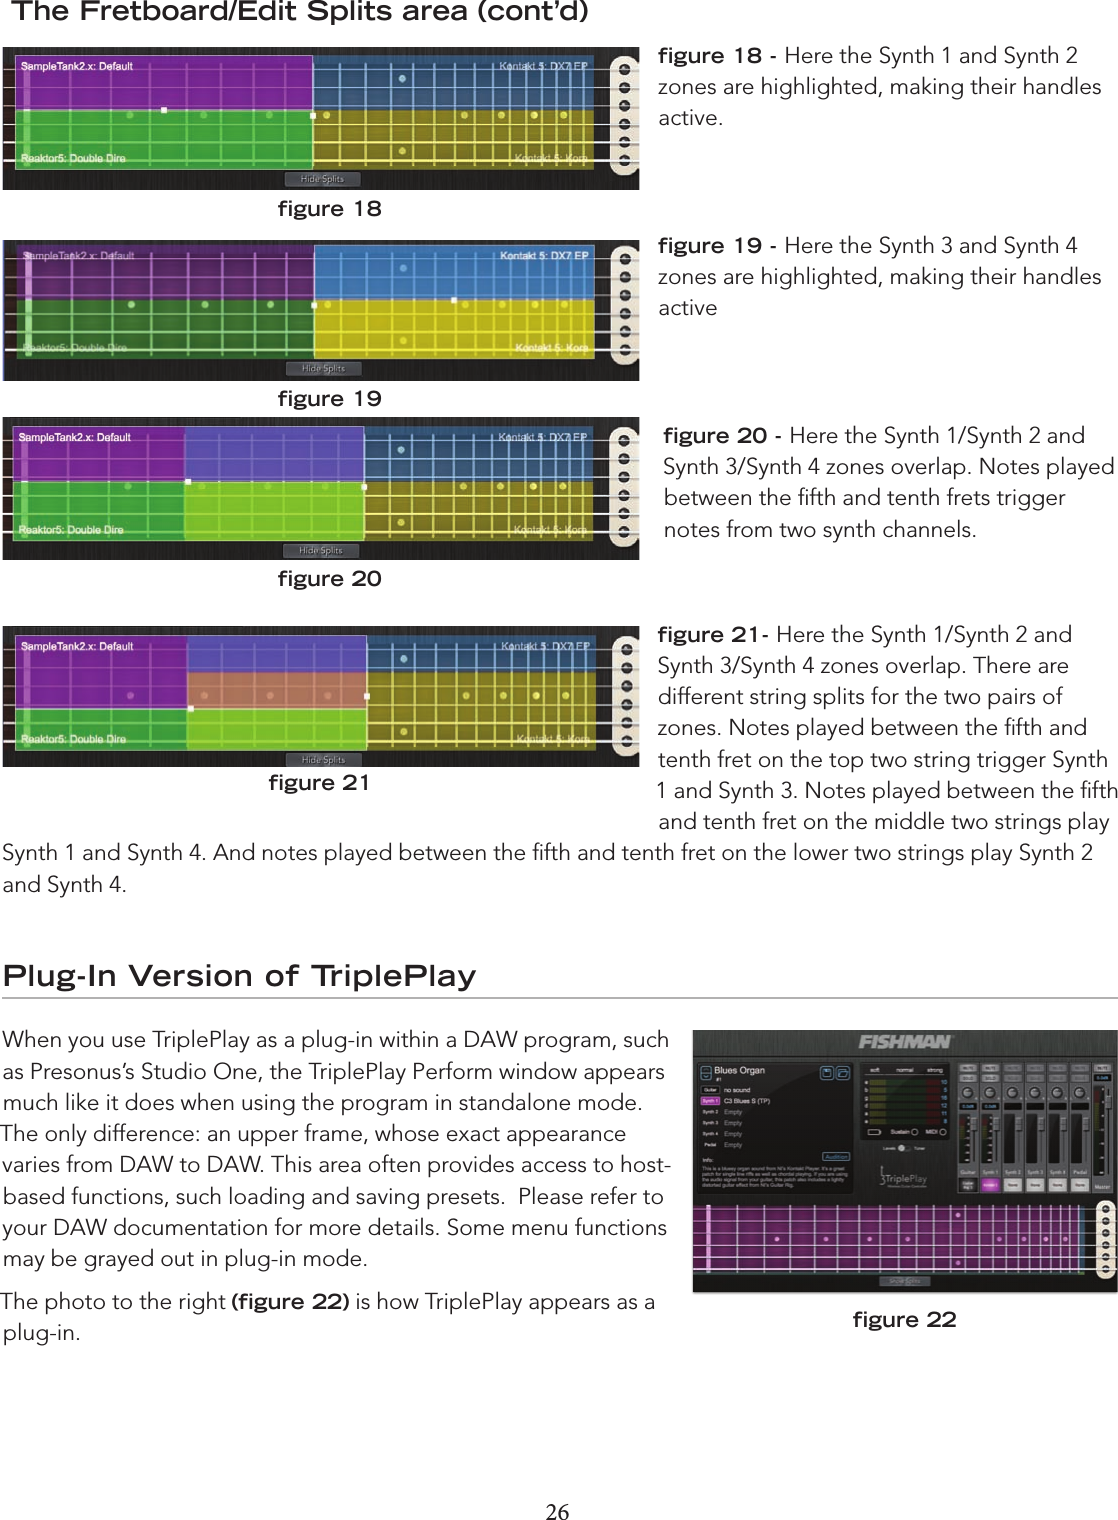 26 27 The Fretboard/Edit Splits area (cont’d)ﬁgure 18 - Here the Synth 1 and Synth 2 zones are highlighted, making their handles active. ﬁgure 19 - Here the Synth 3 and Synth 4 zones are highlighted, making their handles activeﬁgure 20 - Here the Synth 1/Synth 2 and Synth 3/Synth 4 zones overlap. Notes played between the ﬁfth and tenth frets trigger notes from two synth channels.  ﬁgure 21- Here the Synth 1/Synth 2 and Synth 3/Synth 4 zones overlap. There are  different string splits for the two pairs of zones. Notes played between the ﬁfth and tenth fret on the top two string trigger Synth 1 and Synth 3. Notes played between the ﬁfth and tenth fret on the middle two strings play Synth 1 and Synth 4. And notes played between the ﬁfth and tenth fret on the lower two strings play Synth 2 and Synth 4. Plug-In Version of TriplePlayWhen you use TriplePlay as a plug-in within a DAW program, such as Presonus’s Studio One, the TriplePlay Perform window appears much like it does when using the program in standalone mode. The only difference: an upper frame, whose exact appearance varies from DAW to DAW. This area often provides access to host-based functions, such loading and saving presets.  Please refer to your DAW documentation for more details. Some menu functions may be grayed out in plug-in mode.The photo to the right (ﬁgure 22) is how TriplePlay appears as a plug-in.ﬁgure 18ﬁgure 19ﬁgure 20ﬁgure 21ﬁgure 22